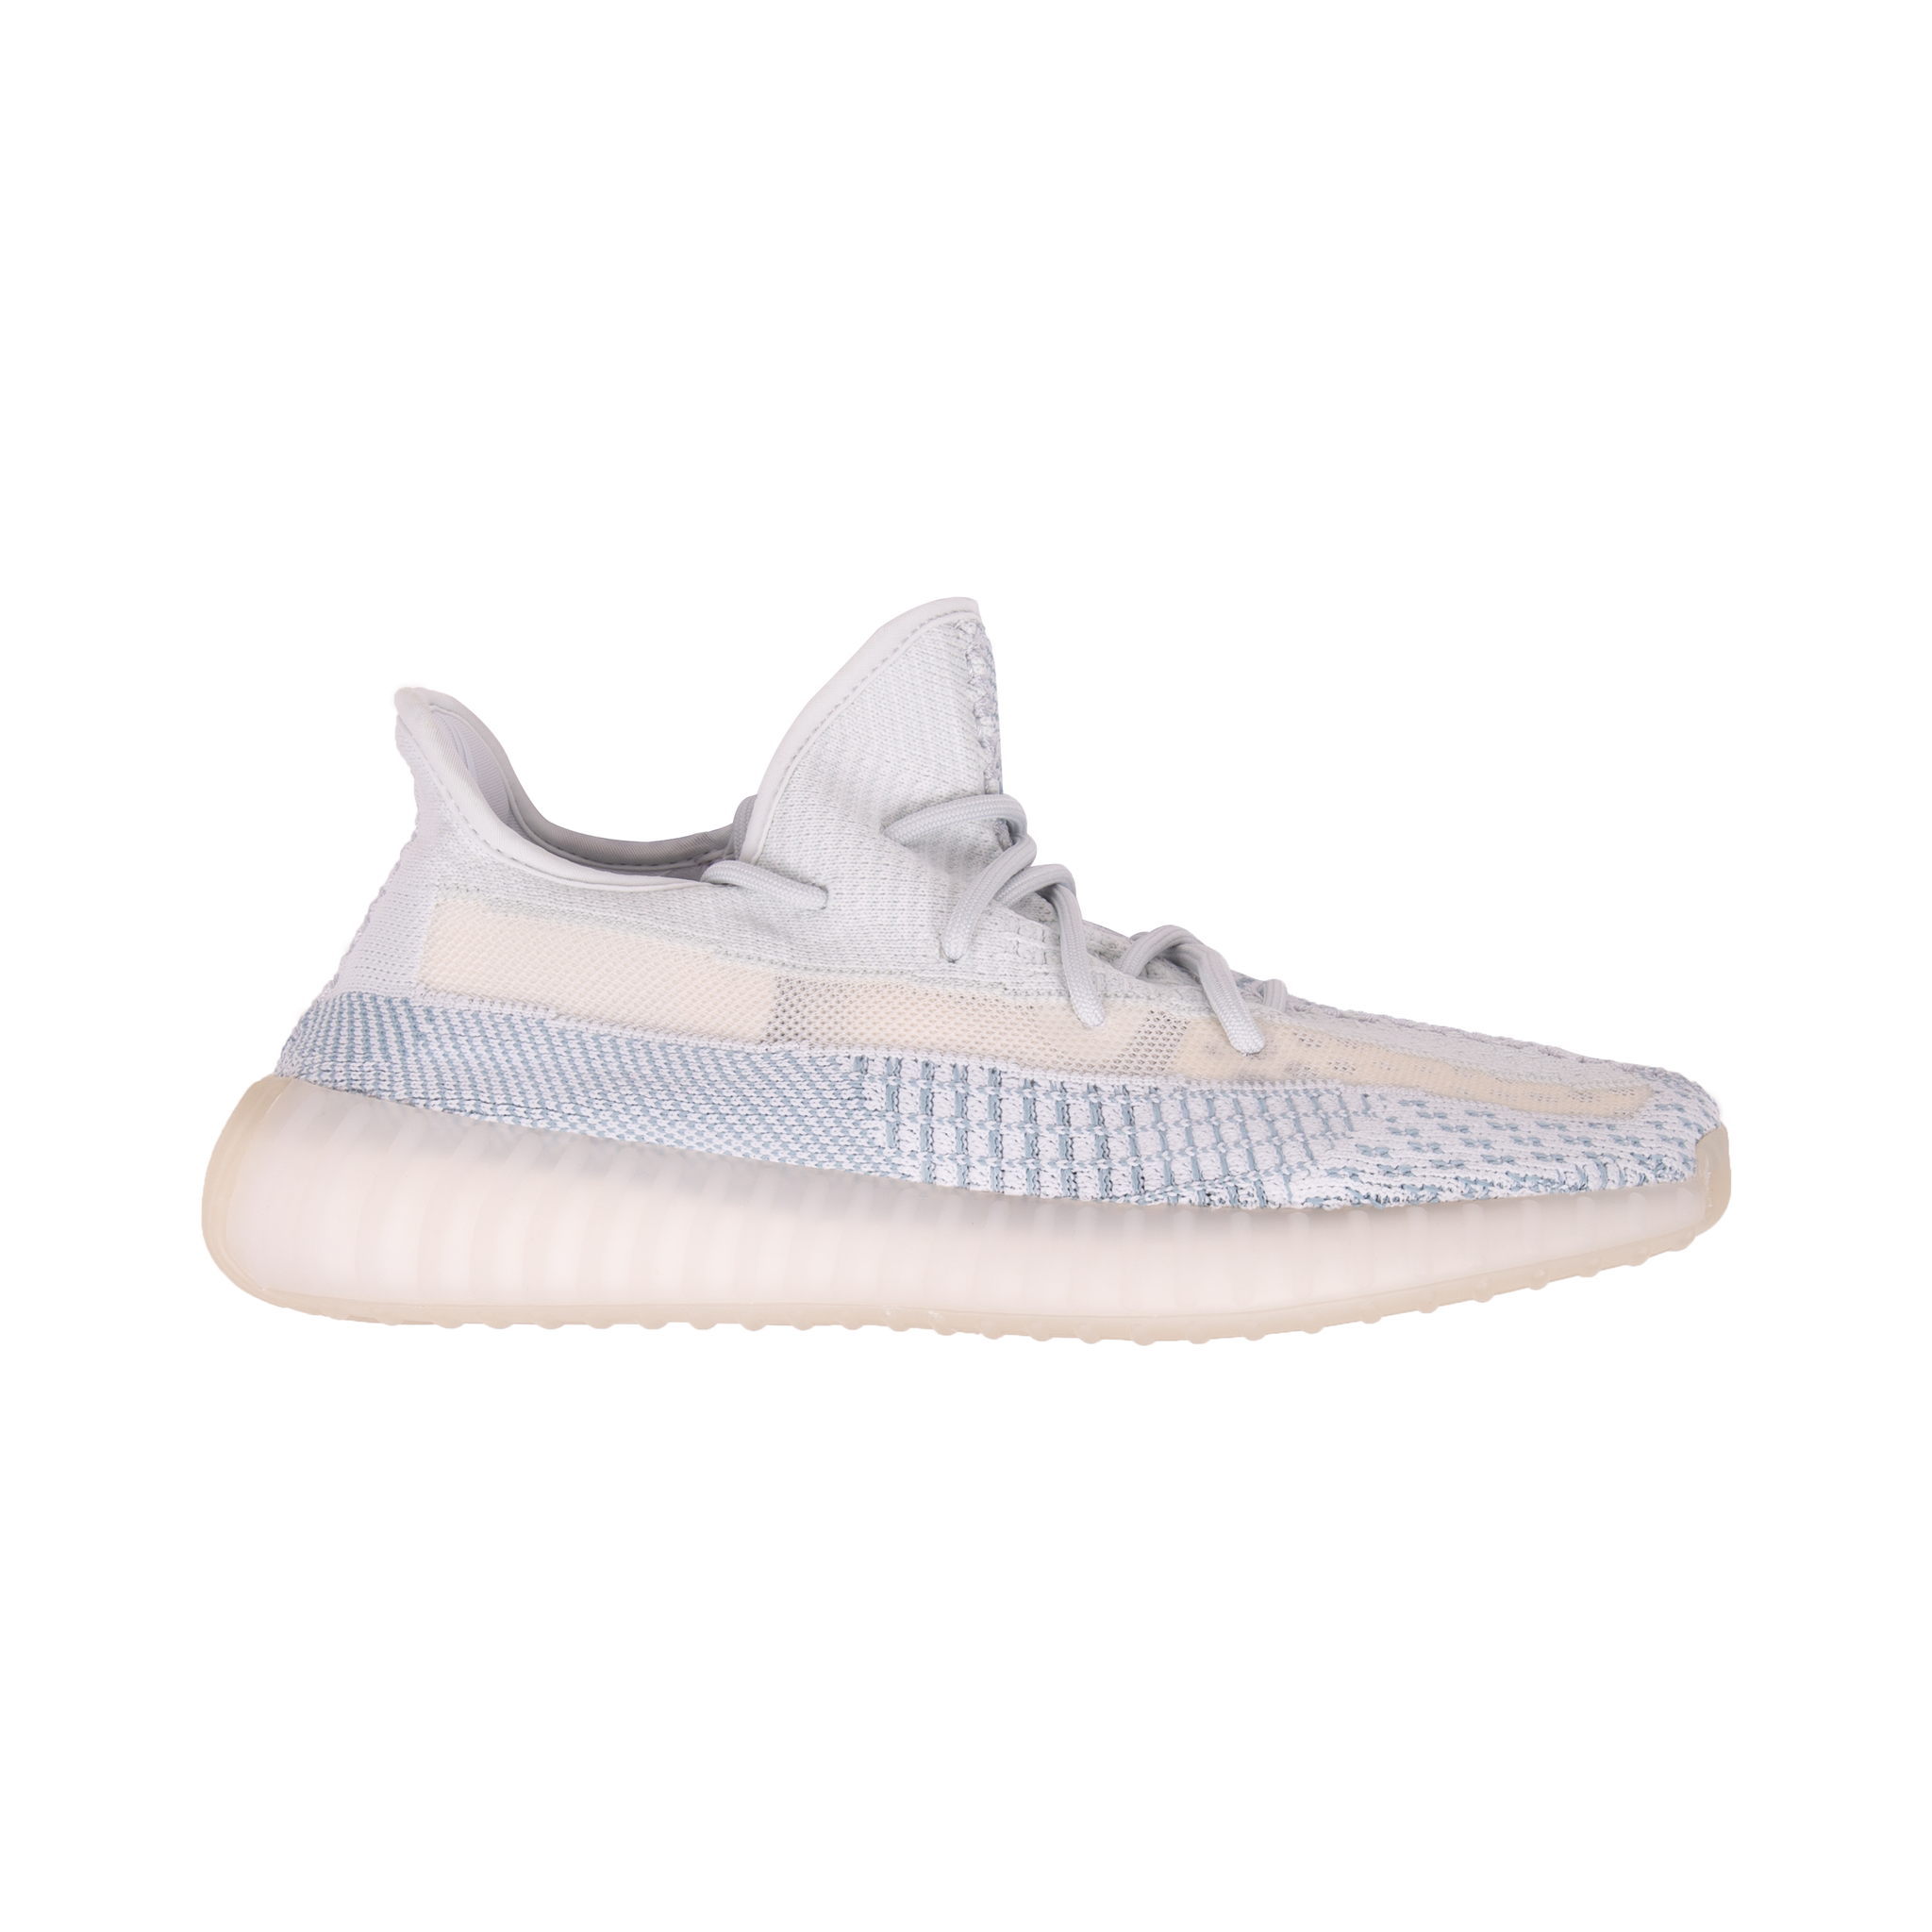 Adidas Cloud White Yeezy 350 Boost – On The Arm